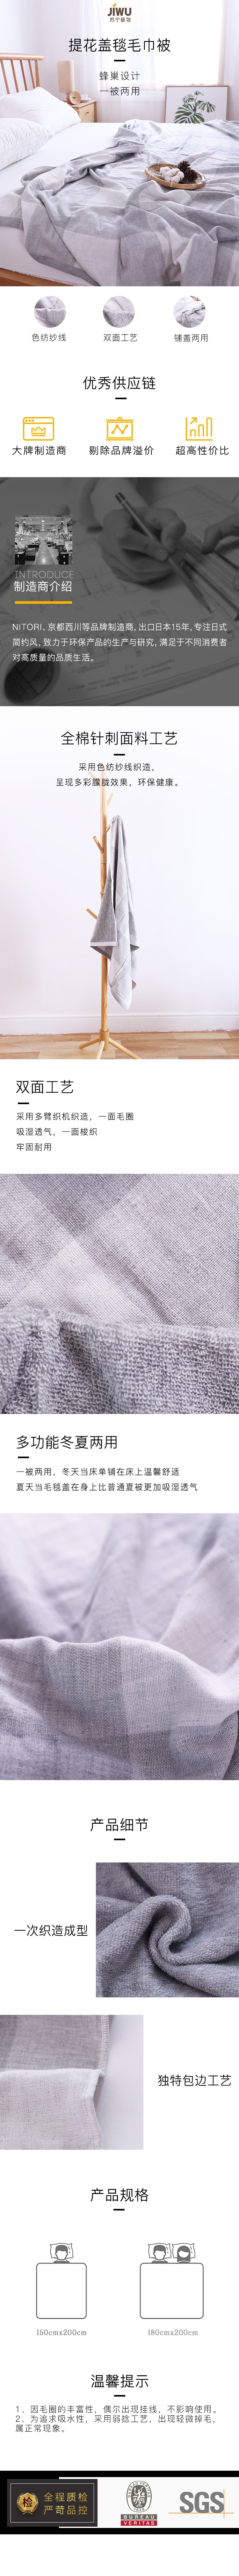 Double Sided Cotton Throw Blanket Grey Size 150*200cm